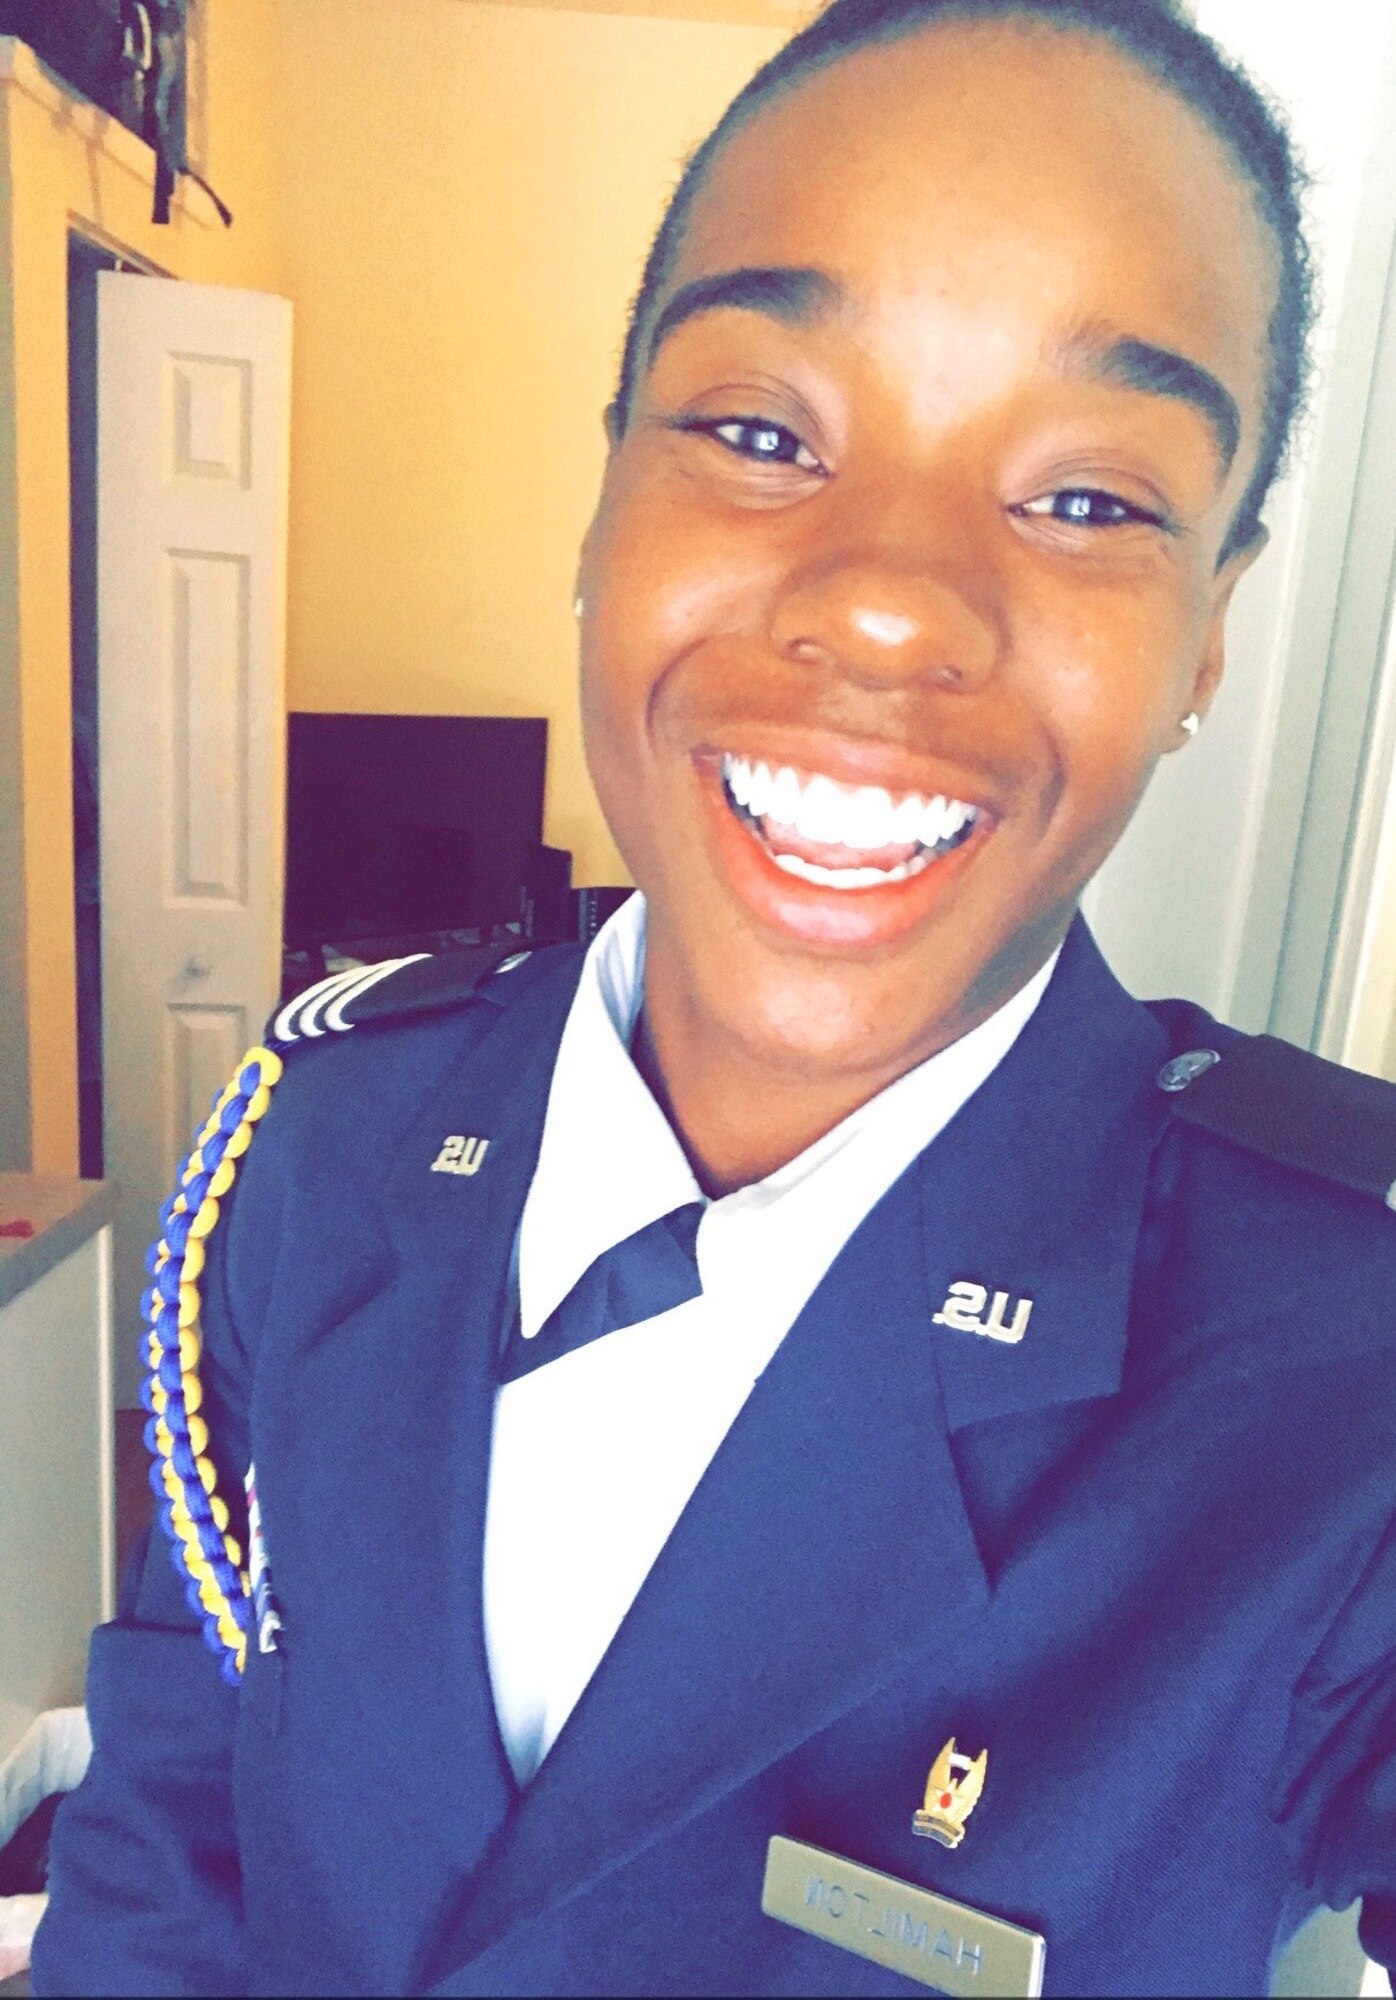 U.S. Air Force 2nd Lt. Destini Hamilton poses in her ROTC uniform before an event.